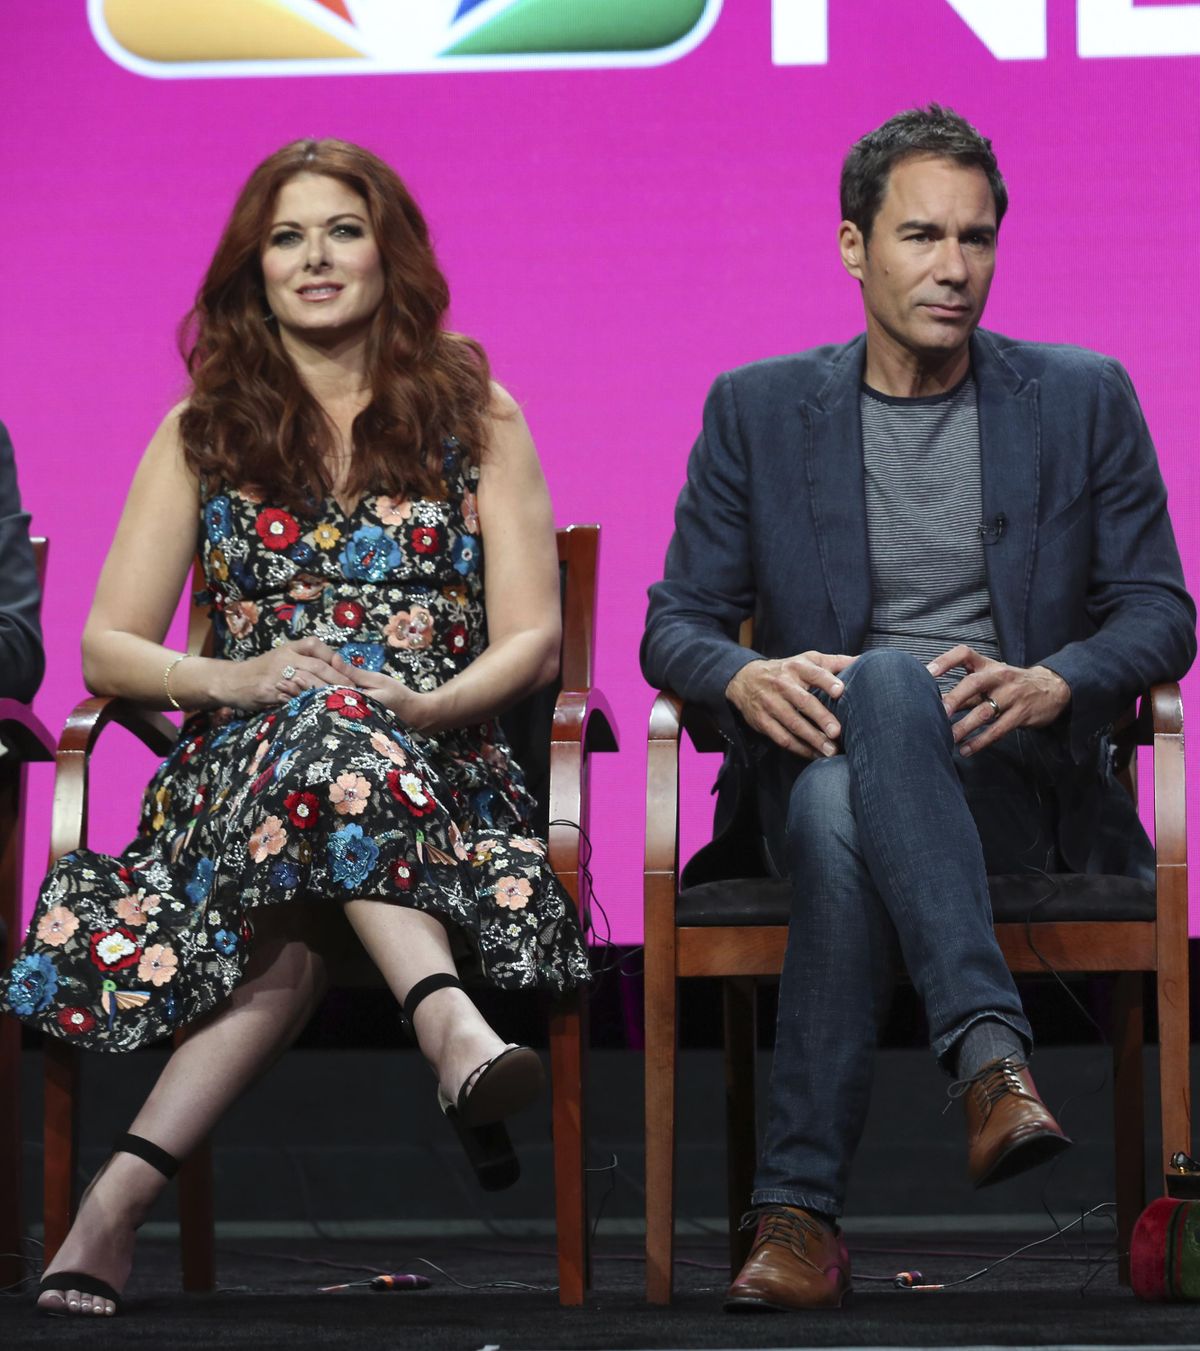 Debra Messing, left, and Eric McCormack participate in the "Will & Grace" panel during the NBC Television Critics Association Summer Press Tour at the Beverly Hilton on Thursday, Aug. 3, 2017, in Beverly Hills, Calif. (Willy Sanjuan / Willy Sanjuan/Invision/AP)